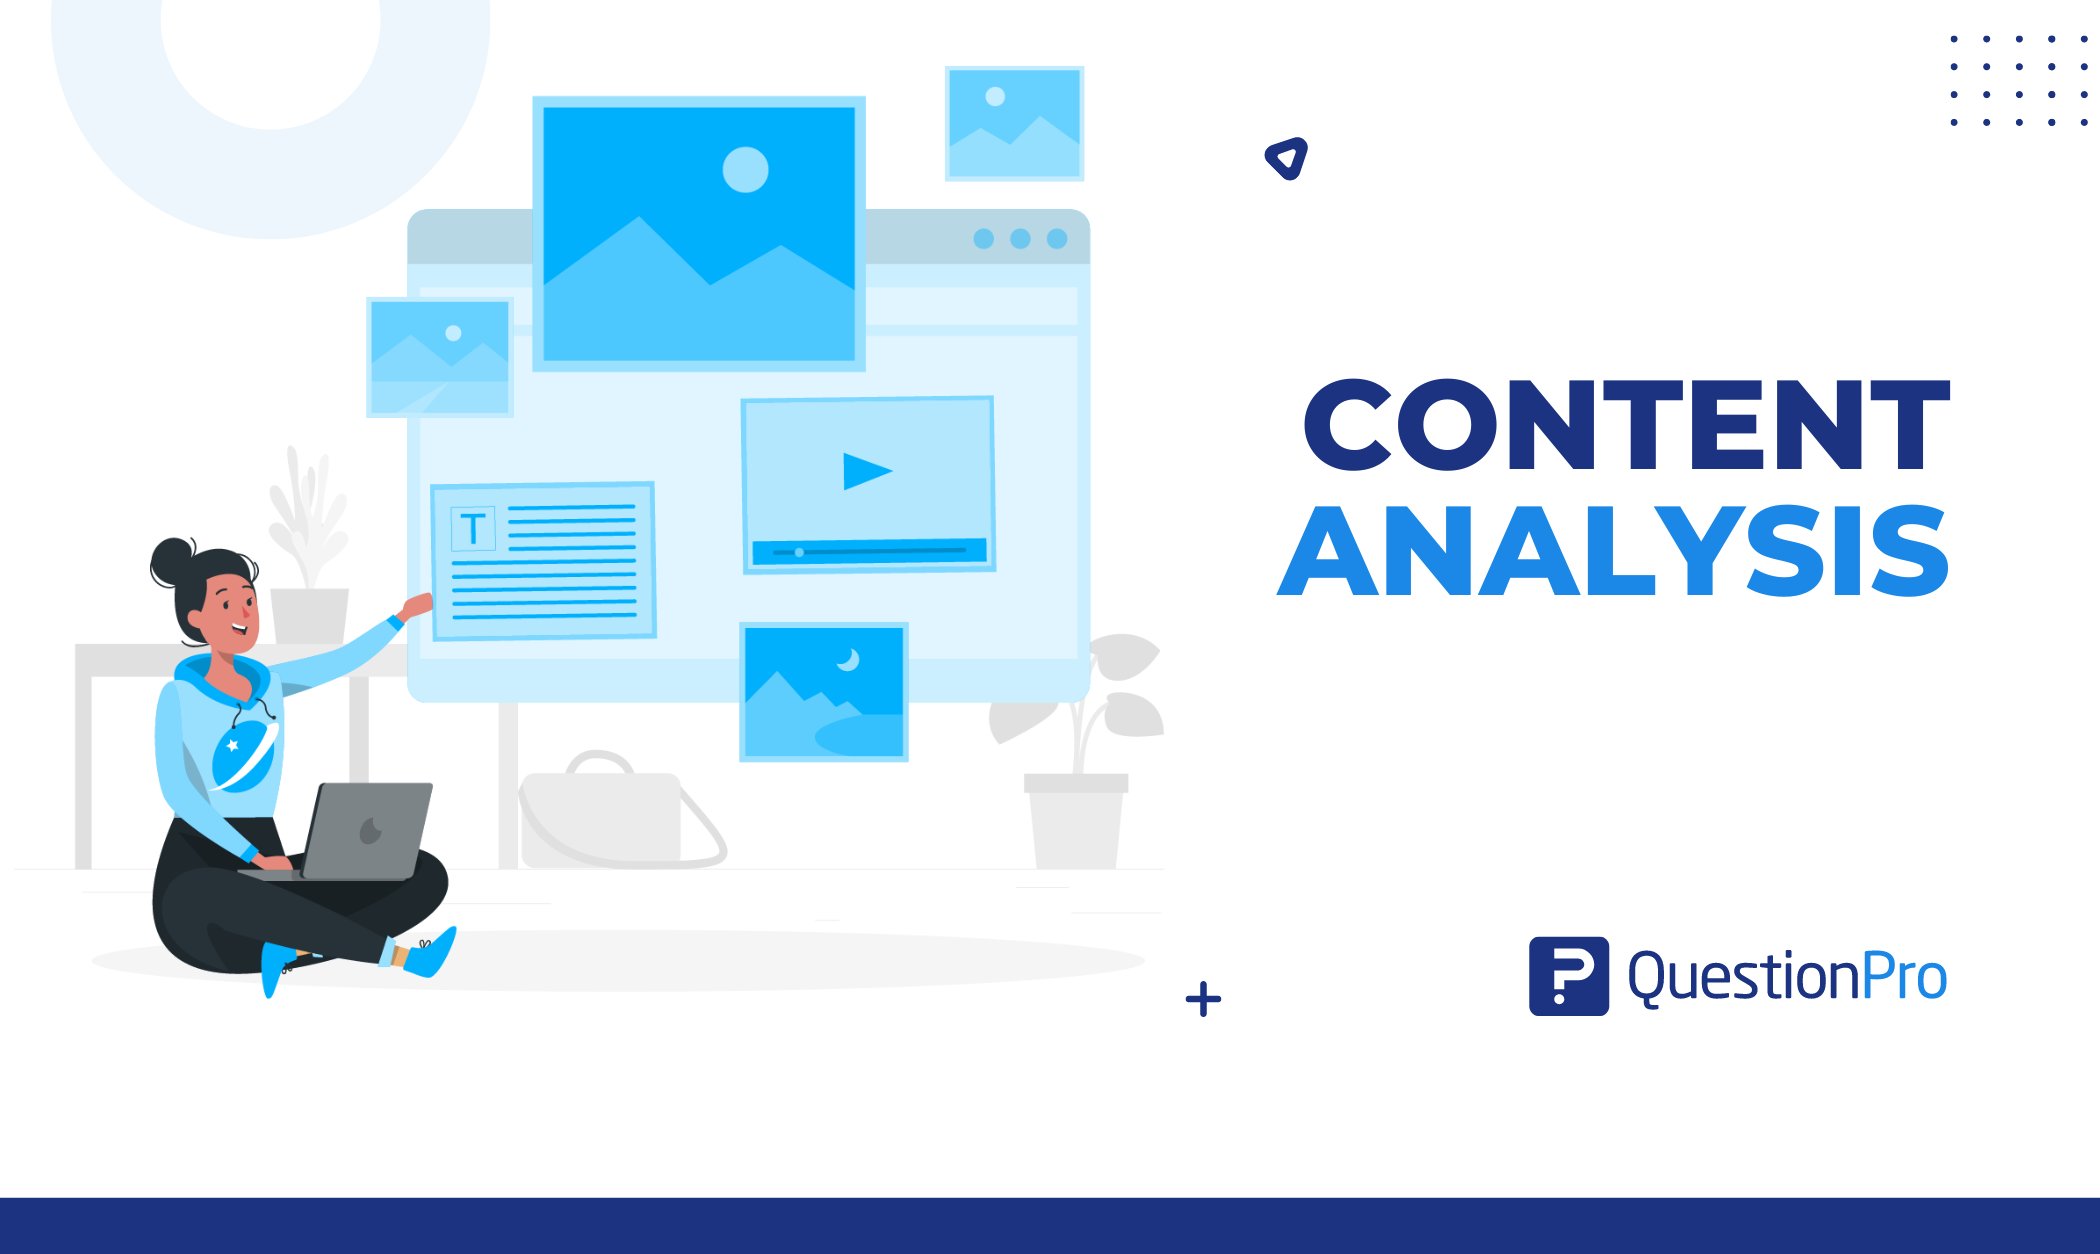 Content analysis acts as guidance, guiding you across the tricky surroundings of analysis and interpretation. This is where it comes in.